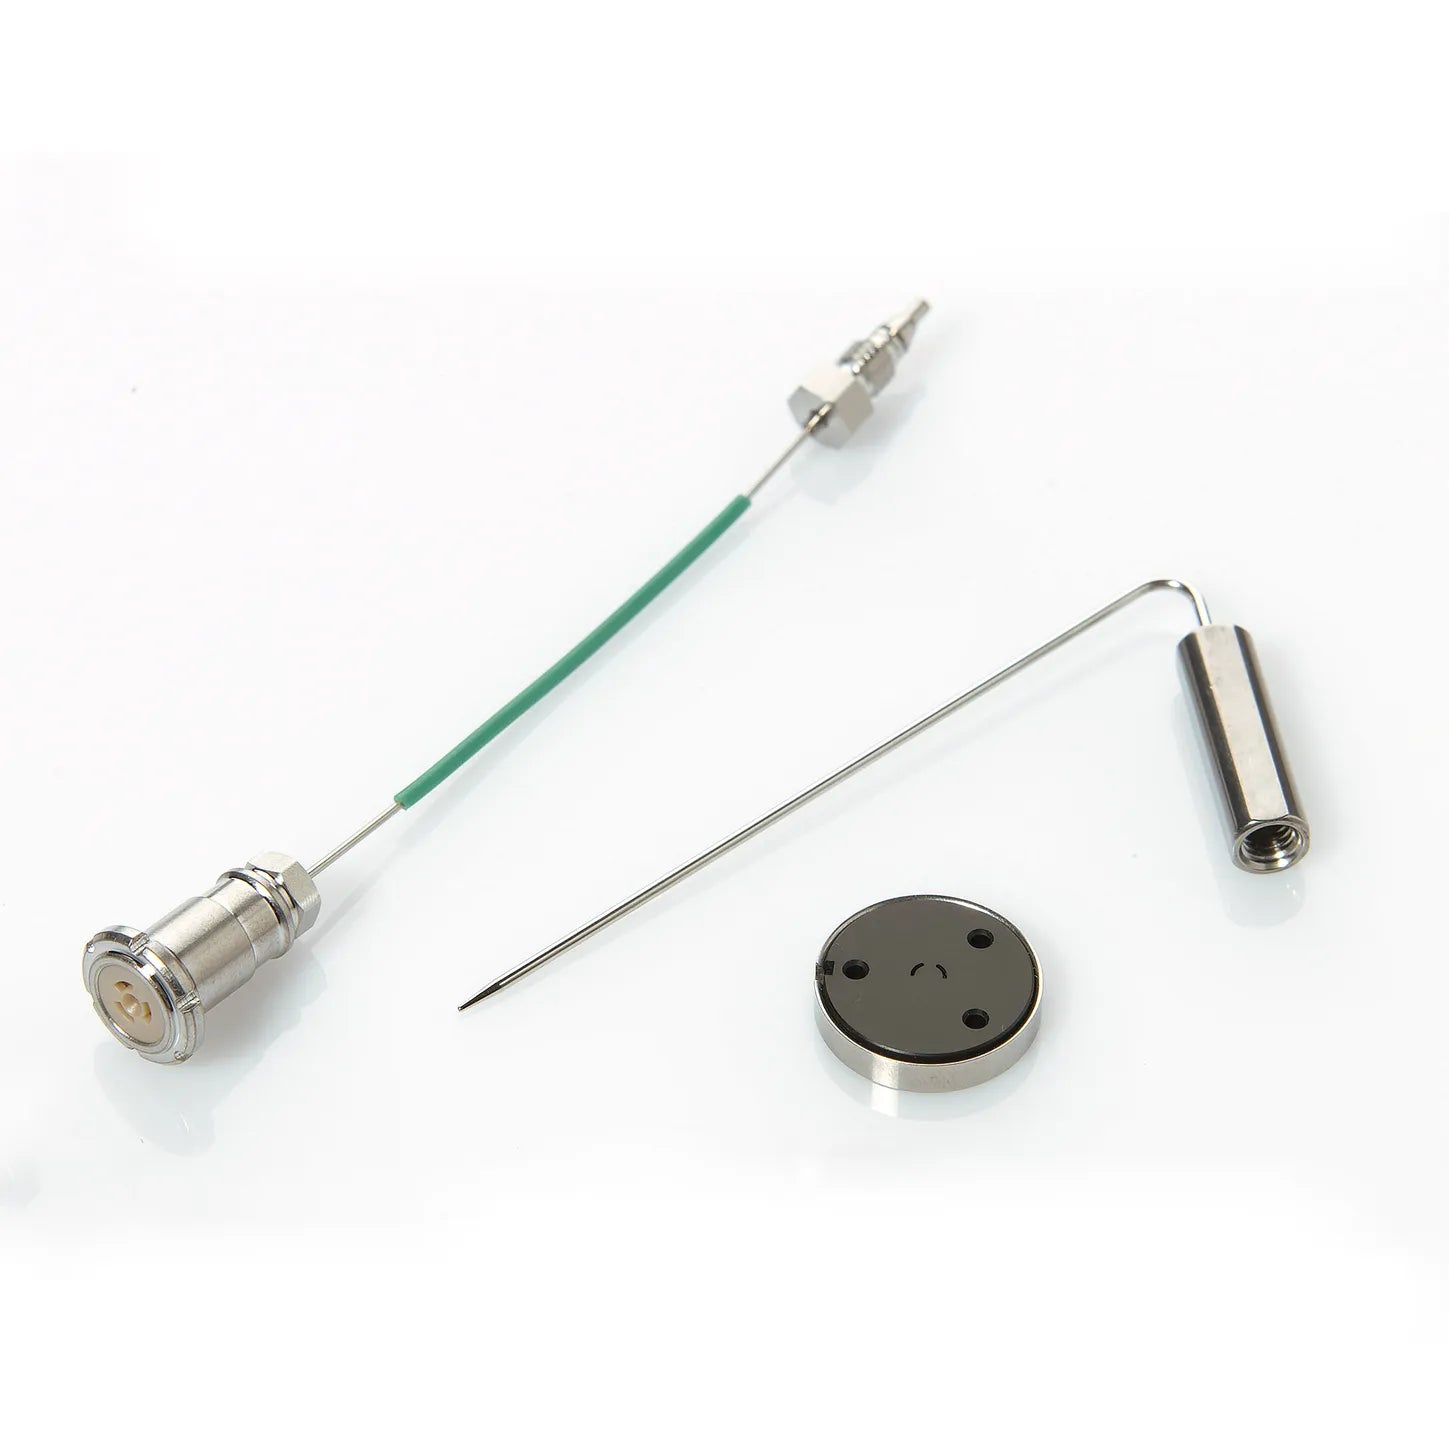 PM Kit for Standard Autosamplers, Comparable to Agilent # G1313-68730